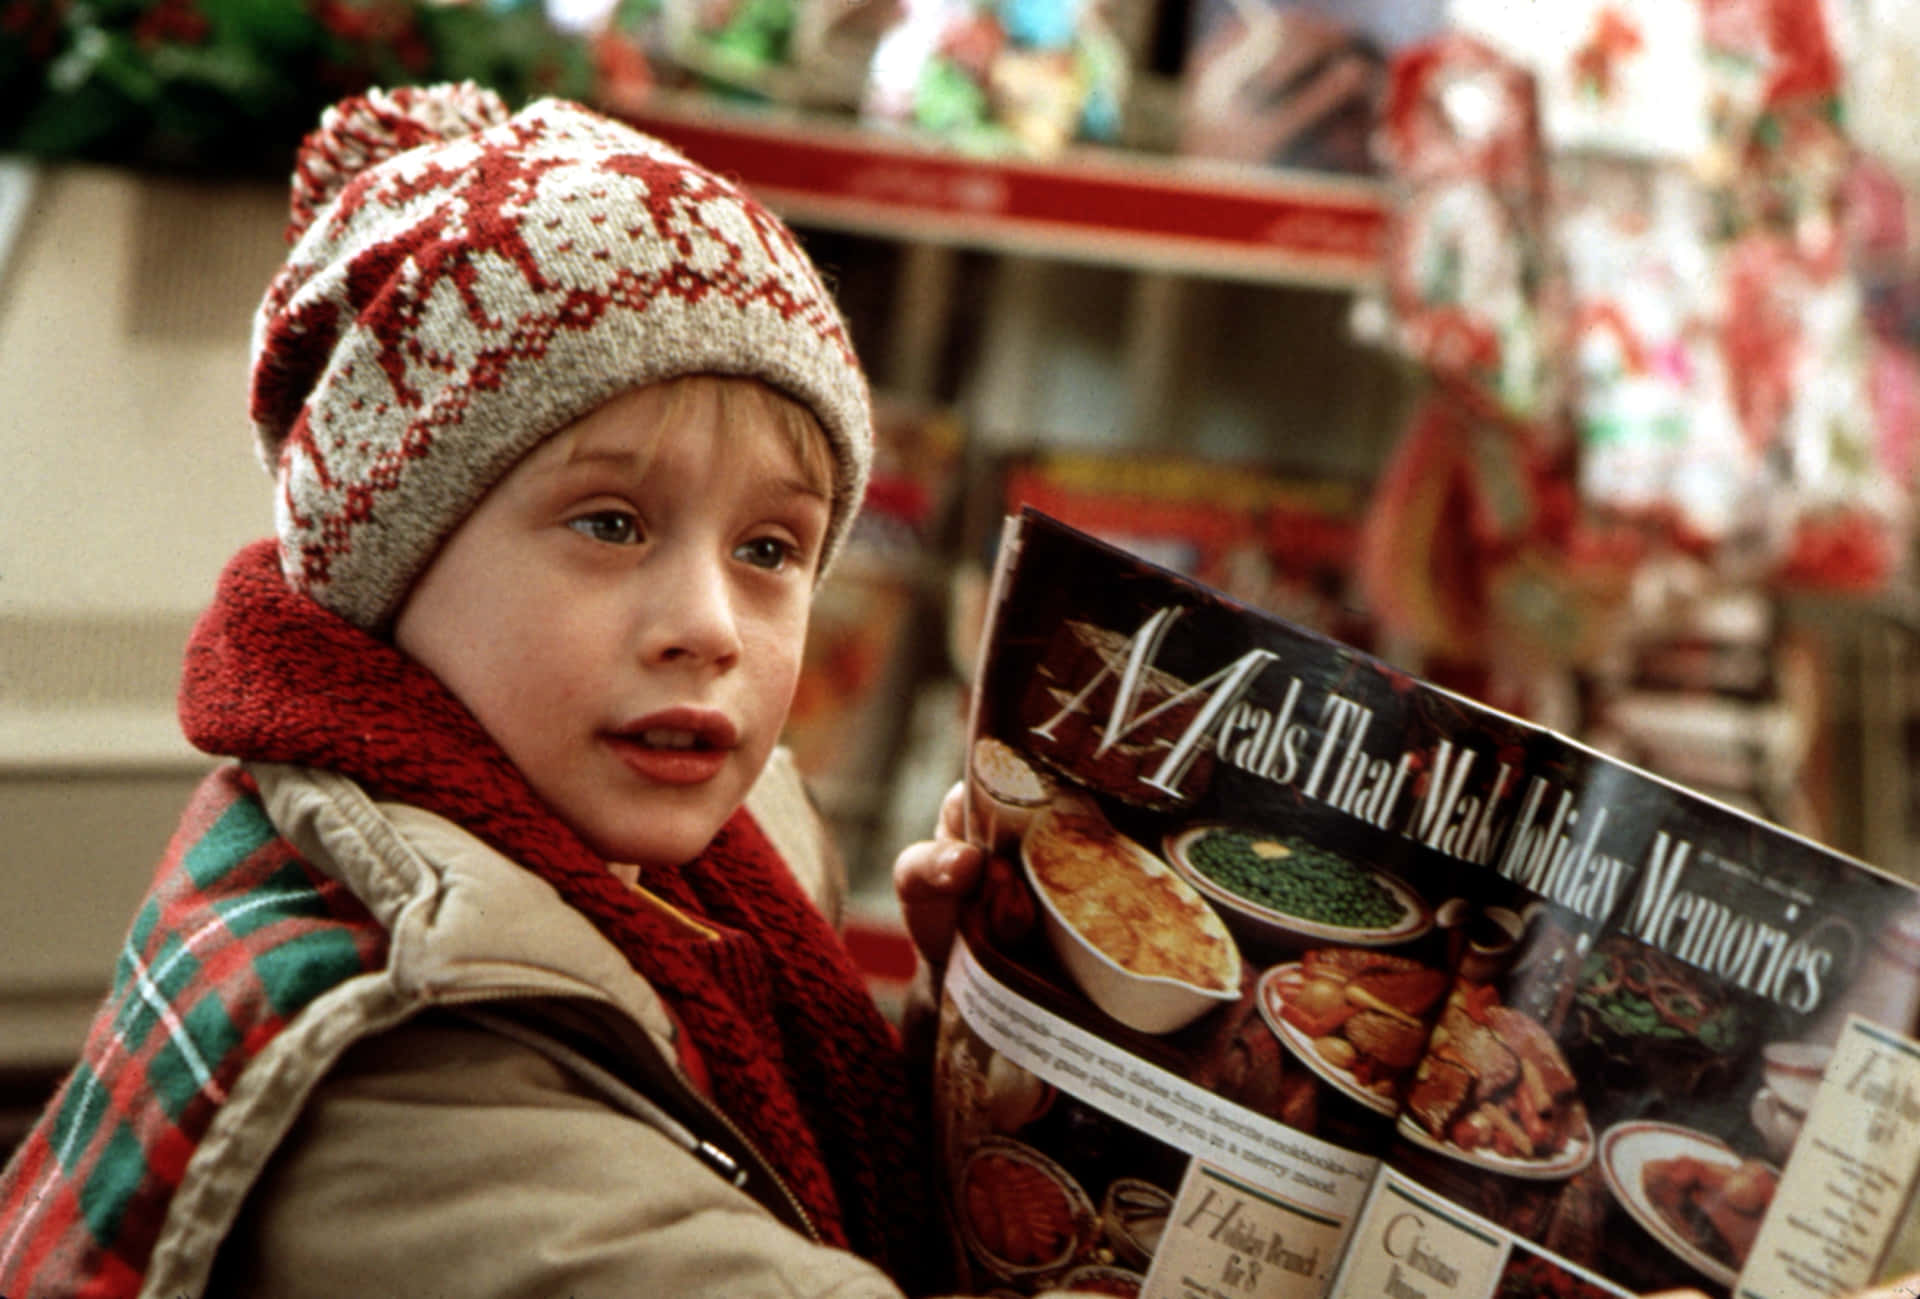 Kevin McCallister happily exclaims in his iconic pose from Home Alone